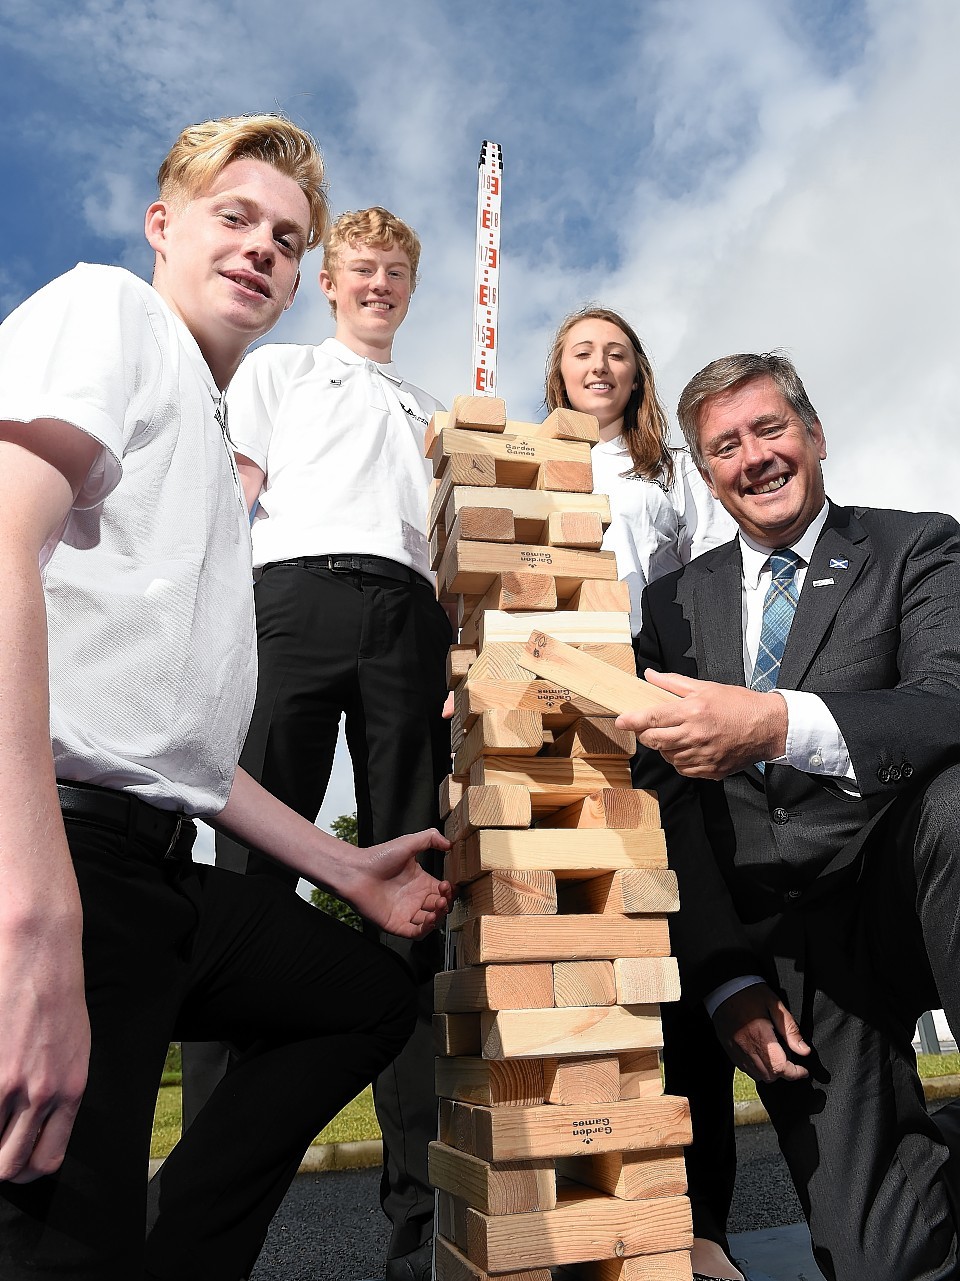 Keith Brown, Infrastructure Minister with pupils from Kingussie High School.  (L-R) Sammy Denman, Scott Aisthorpe, Kirsty Adam and Minister Keith Brown.